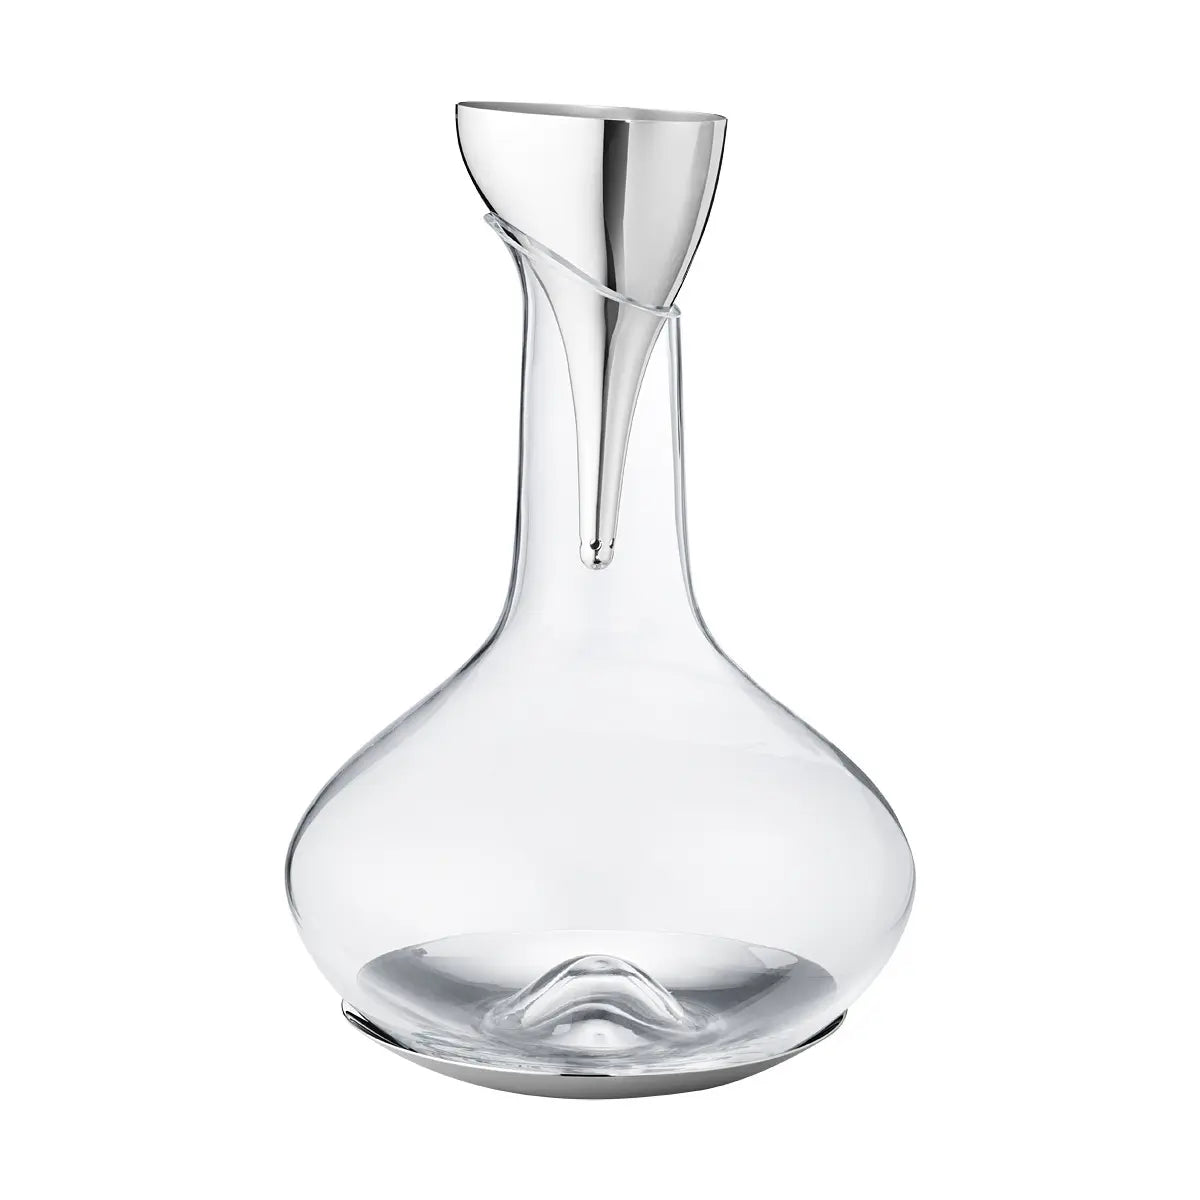 Georg Jensen Stainless Steel Sky Wine Decanter Aerating Funnel with Filter